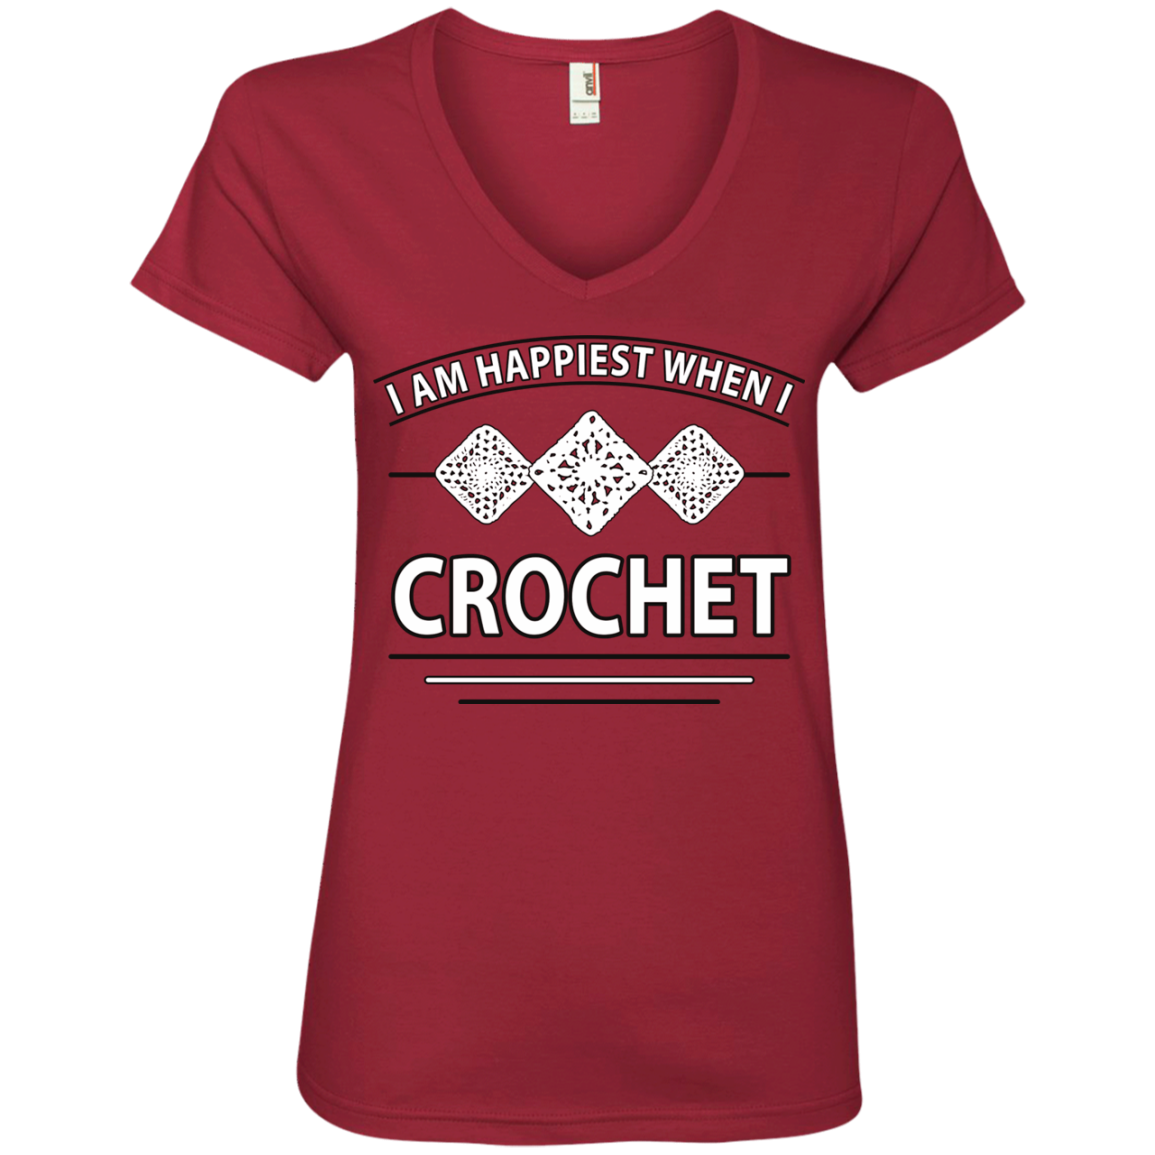 I Am Happiest When I Crochet Ladies V-neck Tee - Crafter4Life - 5